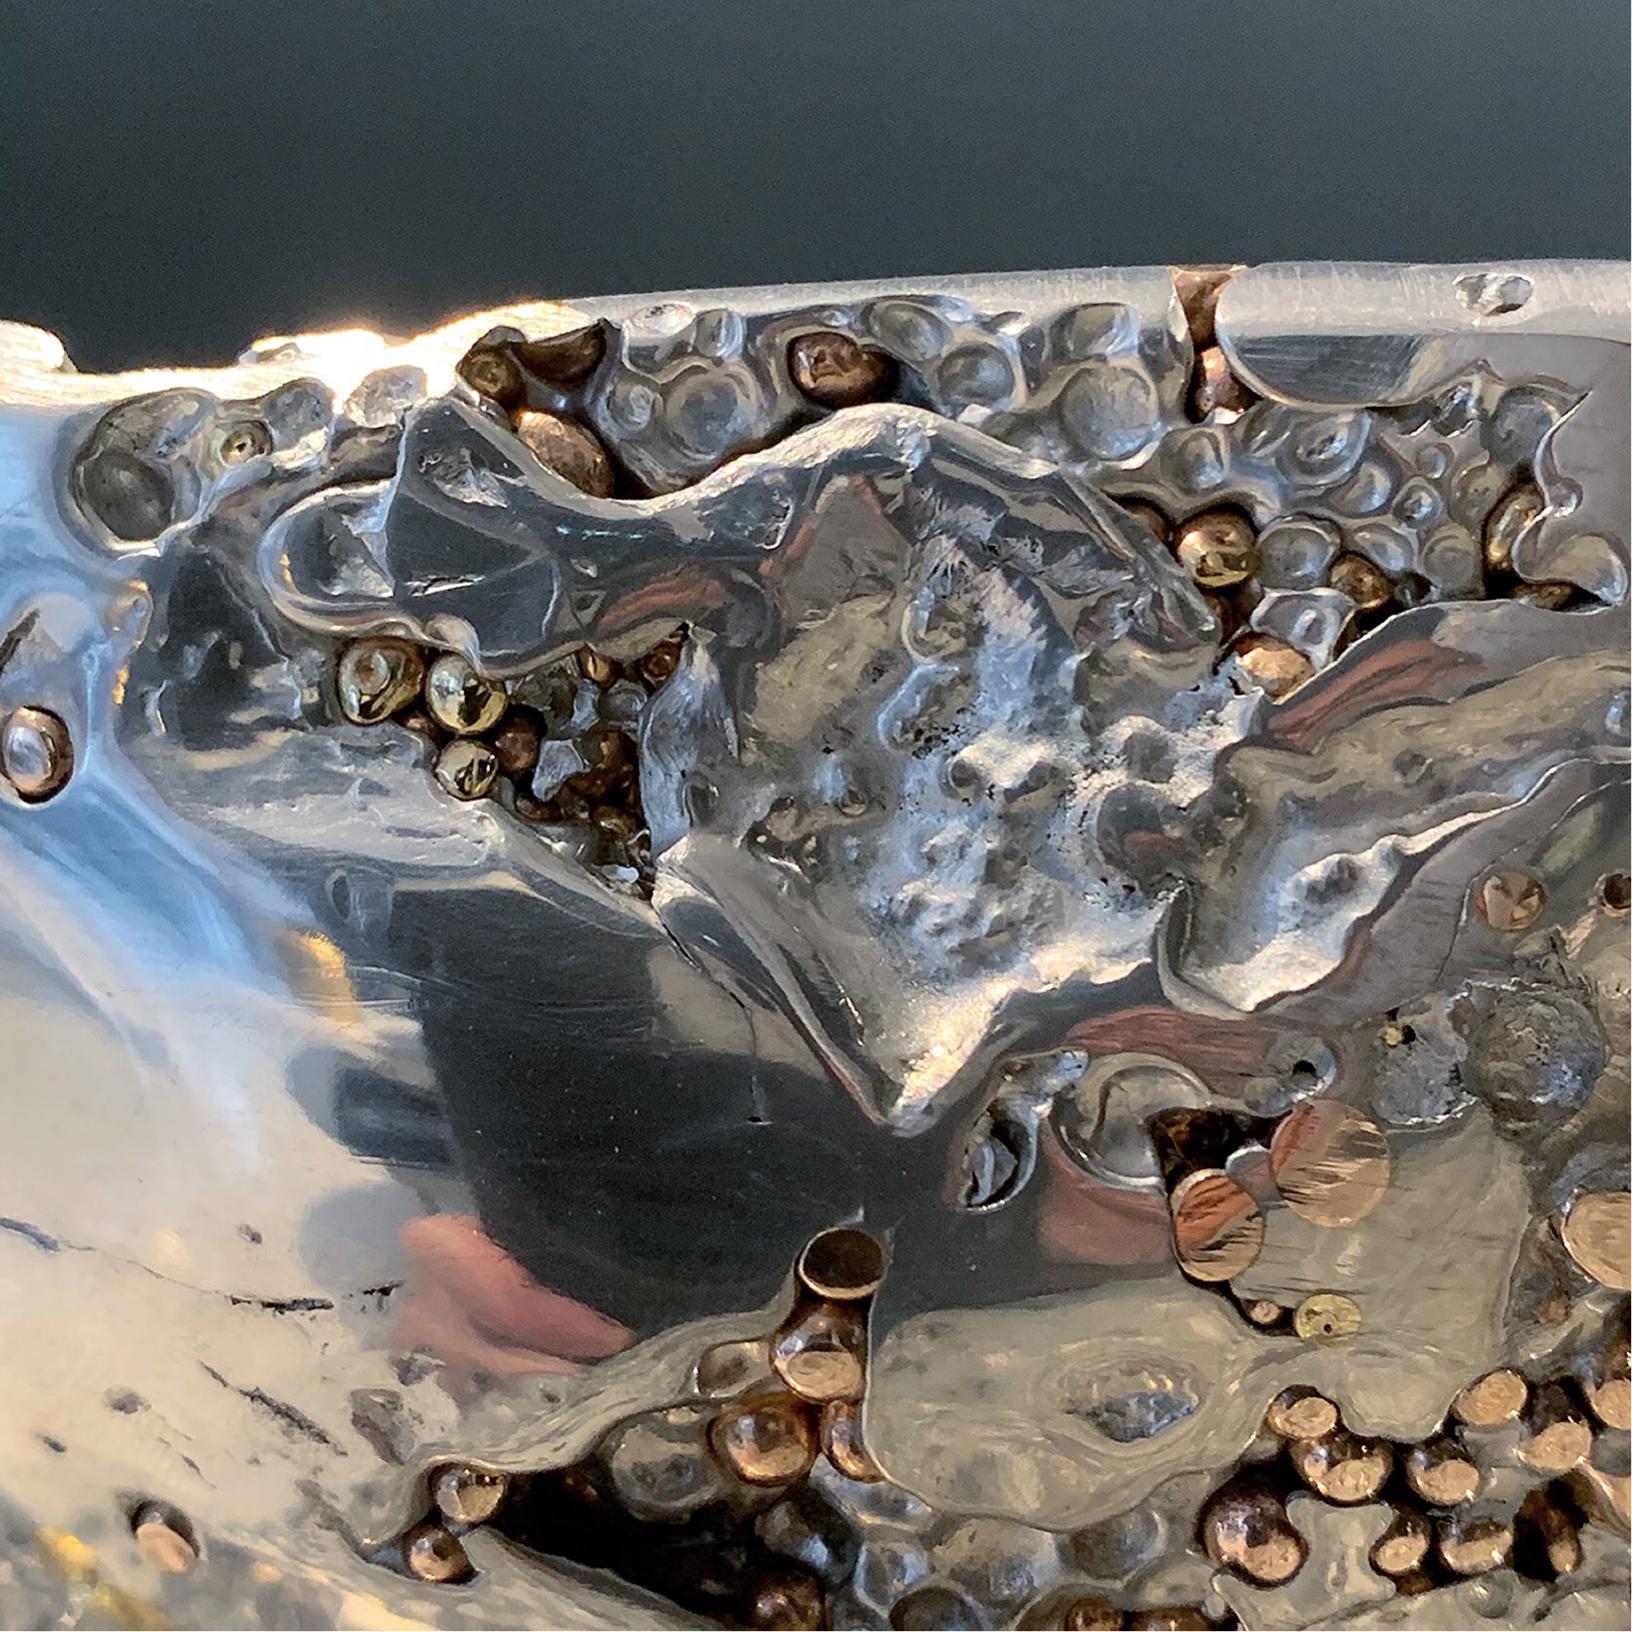 In stock. This contemporary decorative bowl is a unique piece, created by Xavier Lavergne and made of melted pewter with bronze and brass grains. It seems like a Meteorite discovered in Italy. Handmade in France and sold with its “Certificate of